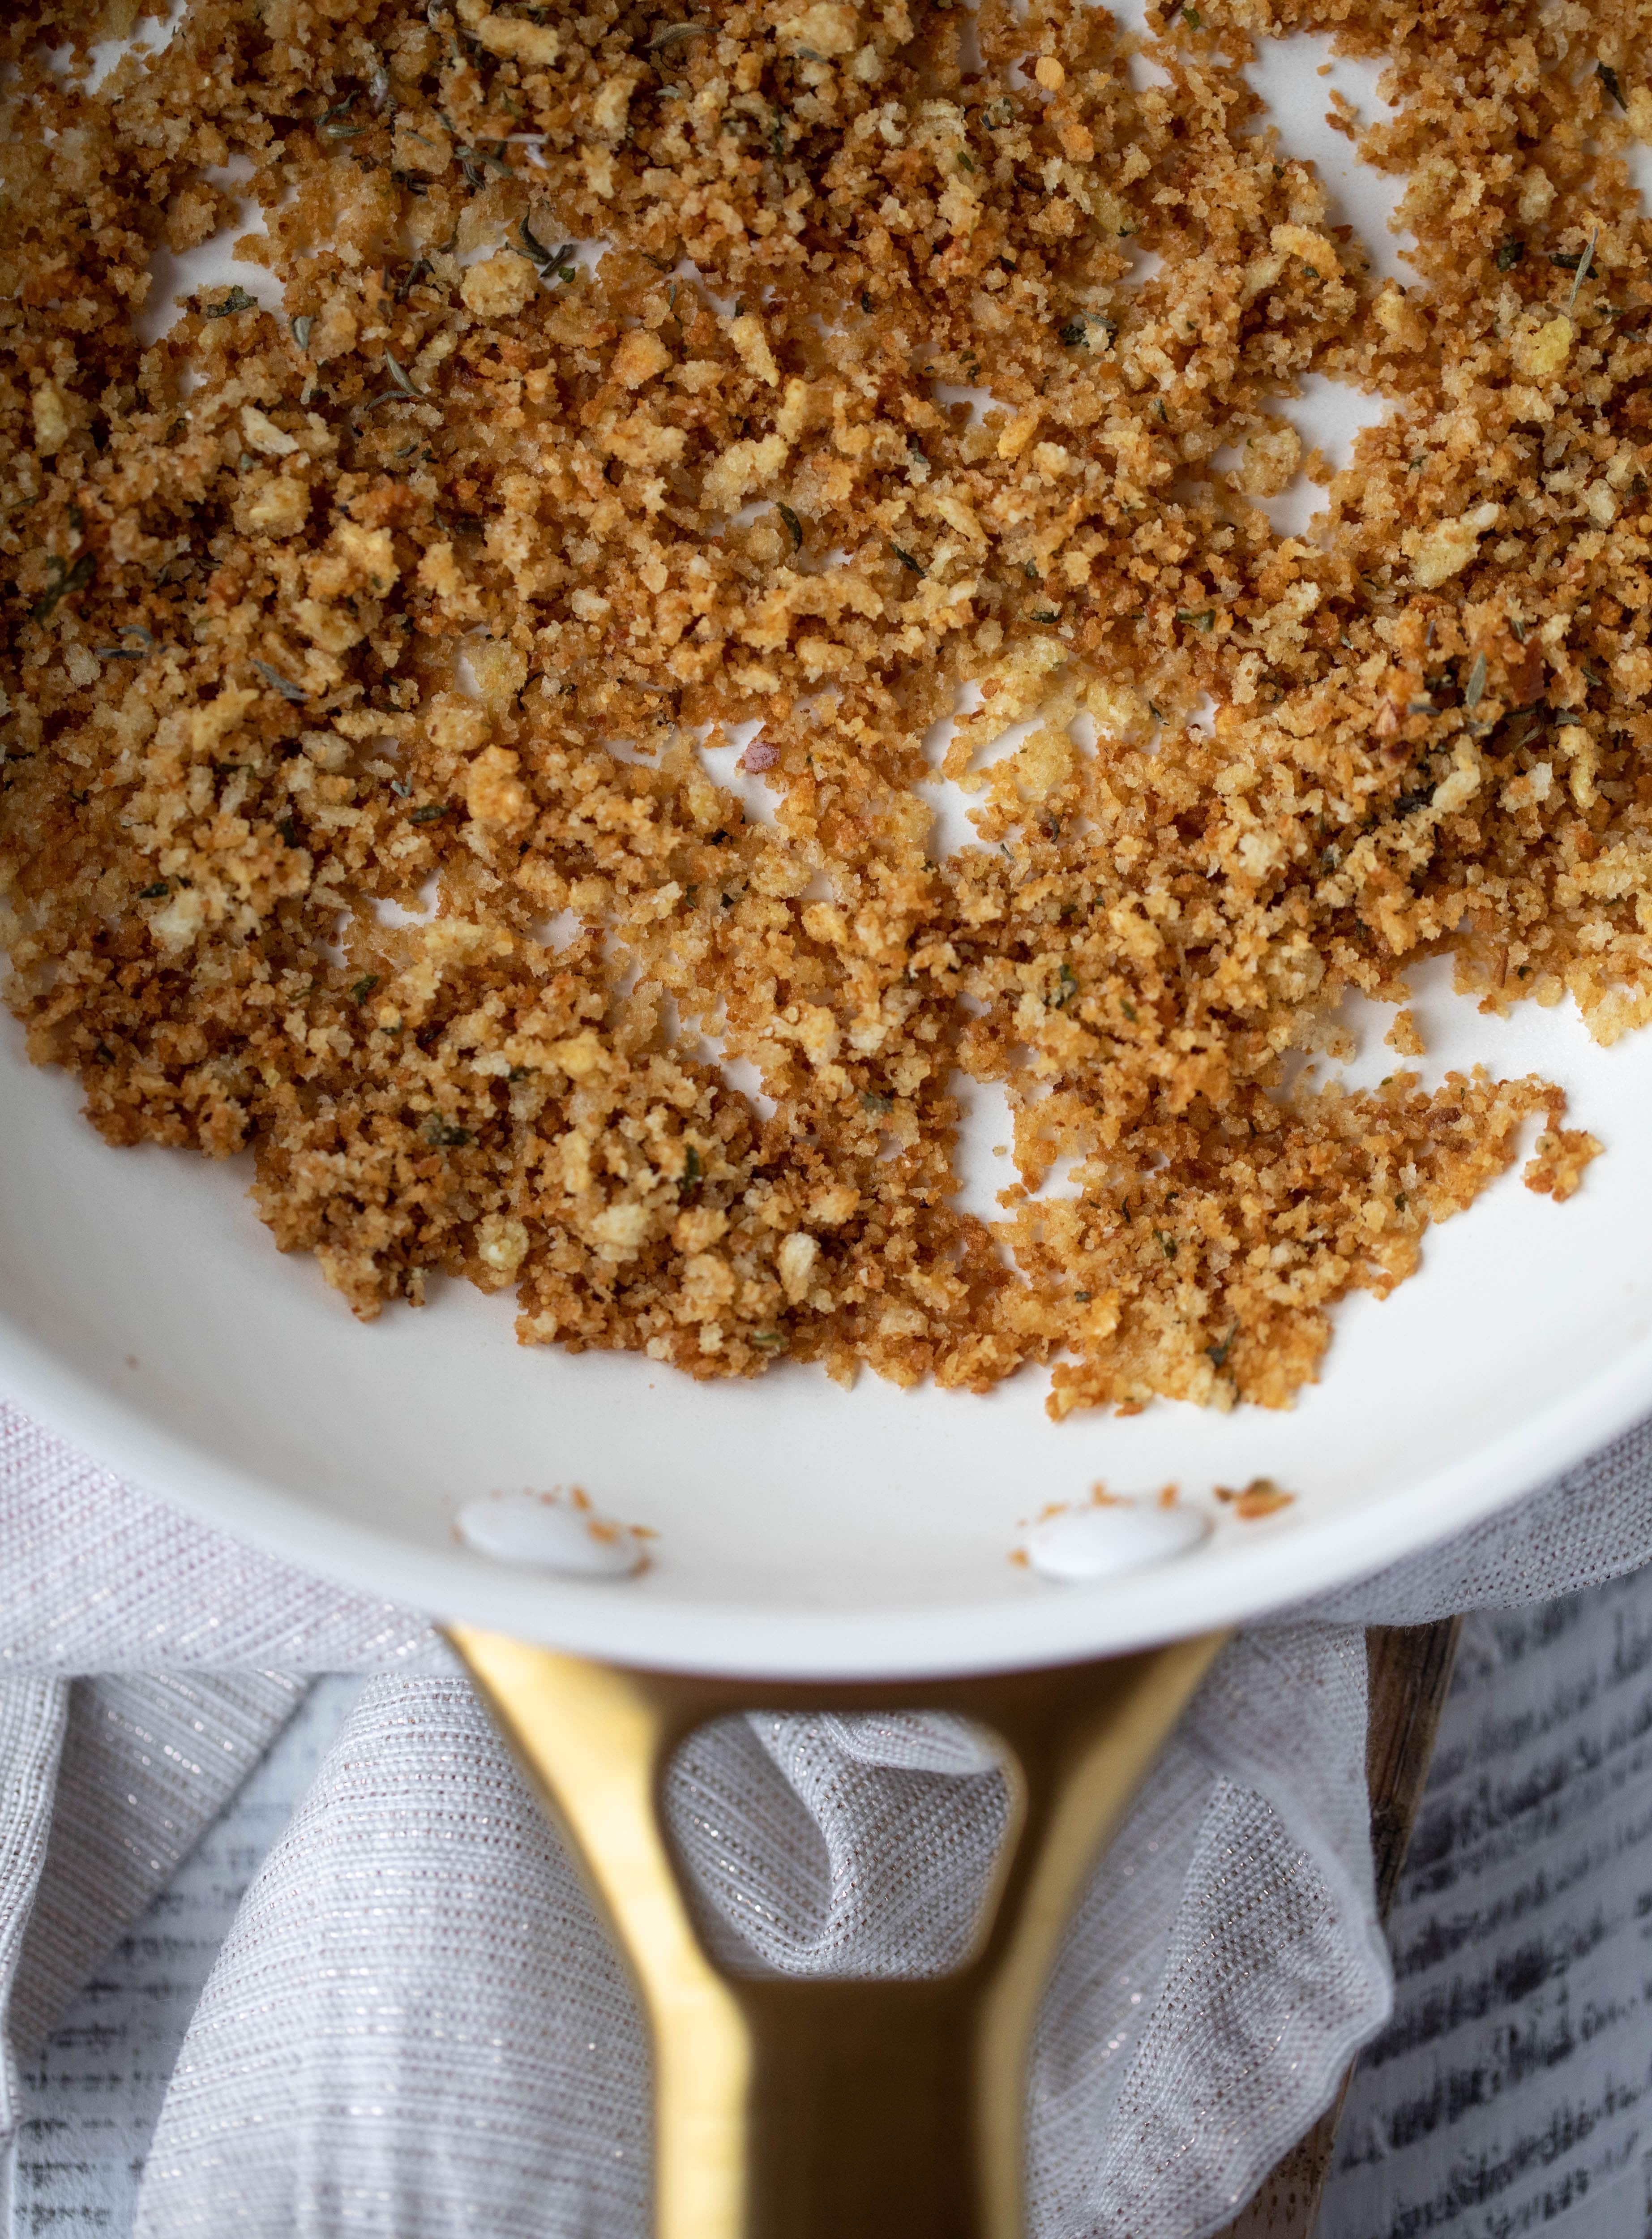 thyme buttered bread crumbs